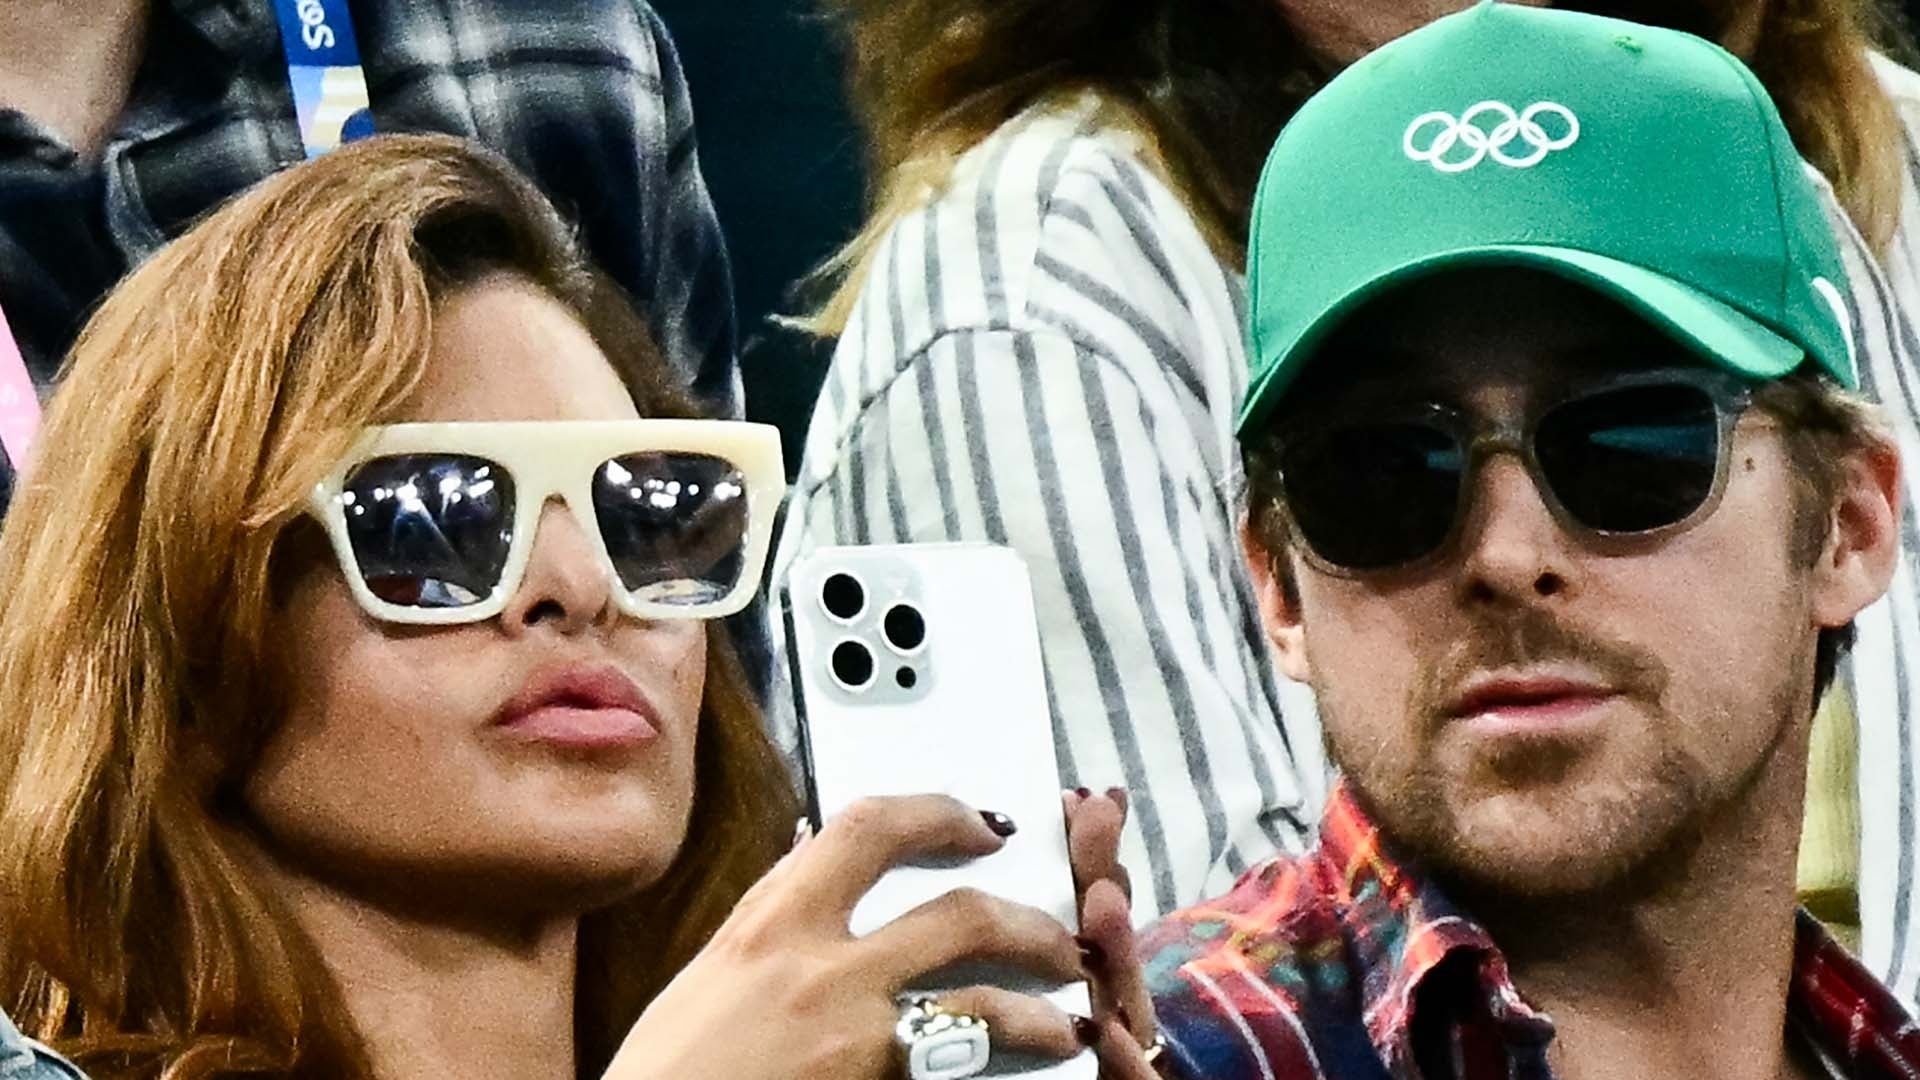 Eva Mendes and Ryan Gosling Step Out for Rare Public Appearance With Daughters